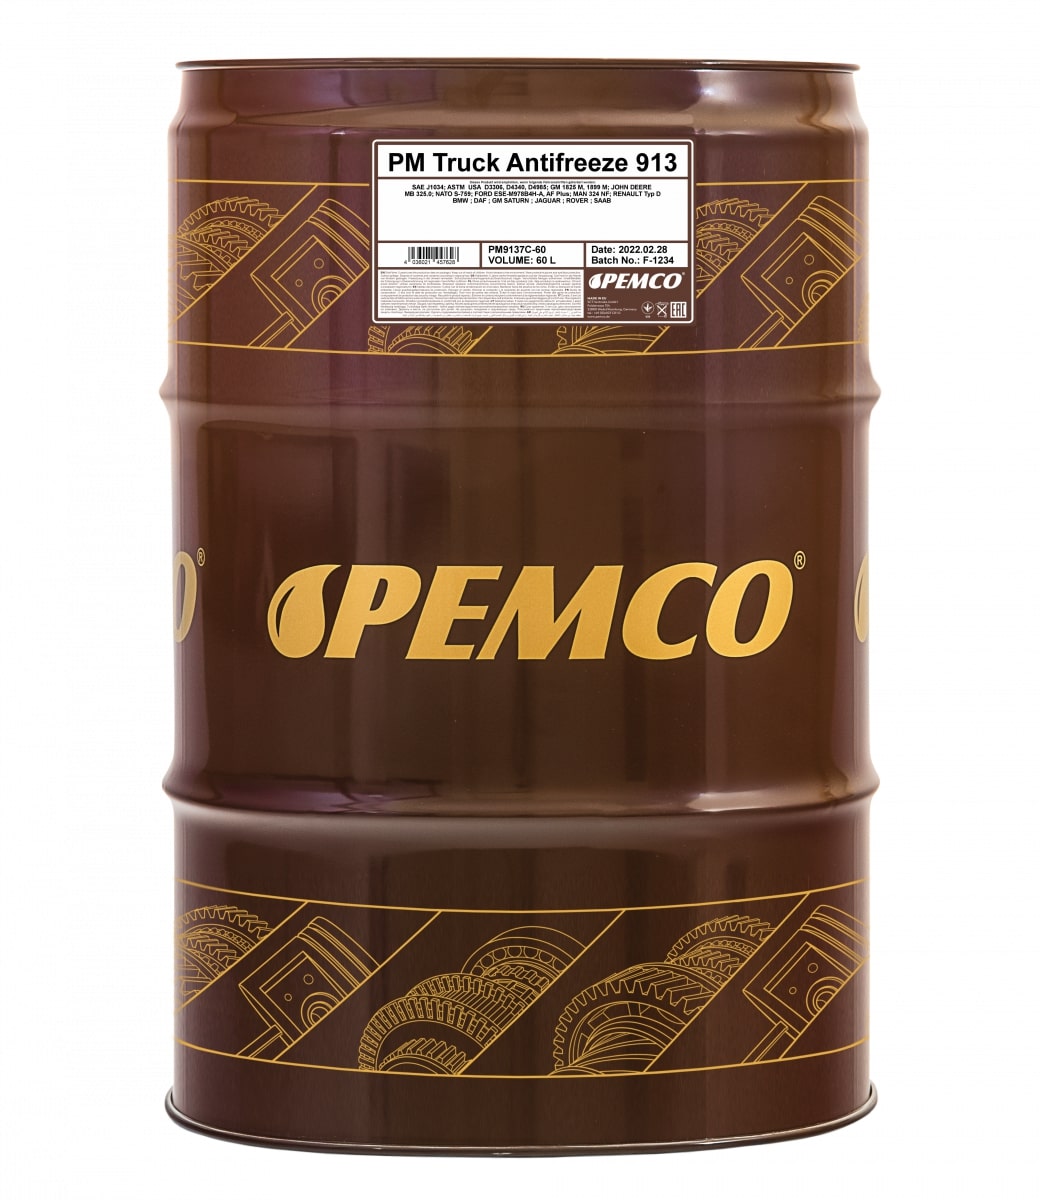  PEMCO Truck Antifreeze 913 (Concentrate)